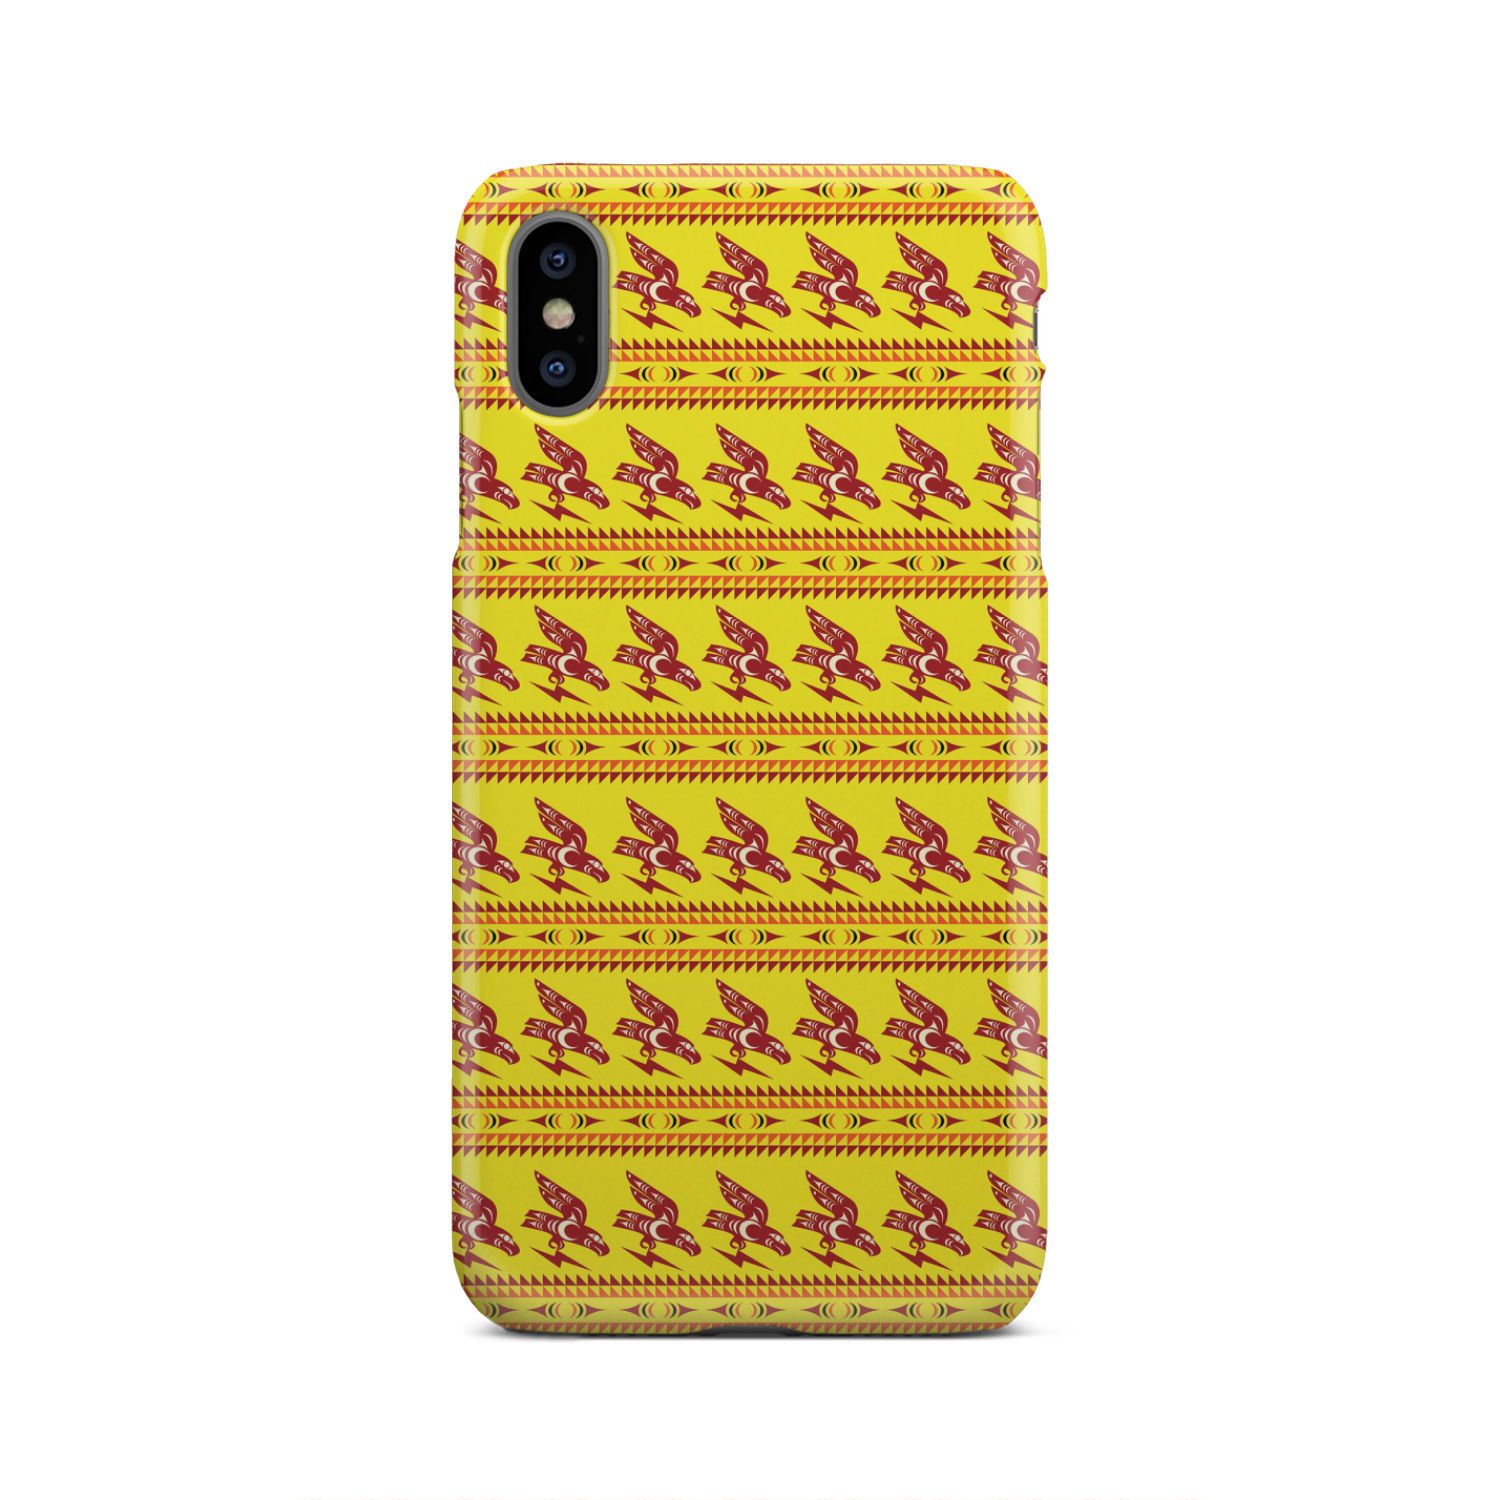 Ovila Mailhot Design : Eagle Brings Good Vibes Yellow Phone Case Phone Case wc-fulfillment iPhone Xs Max 